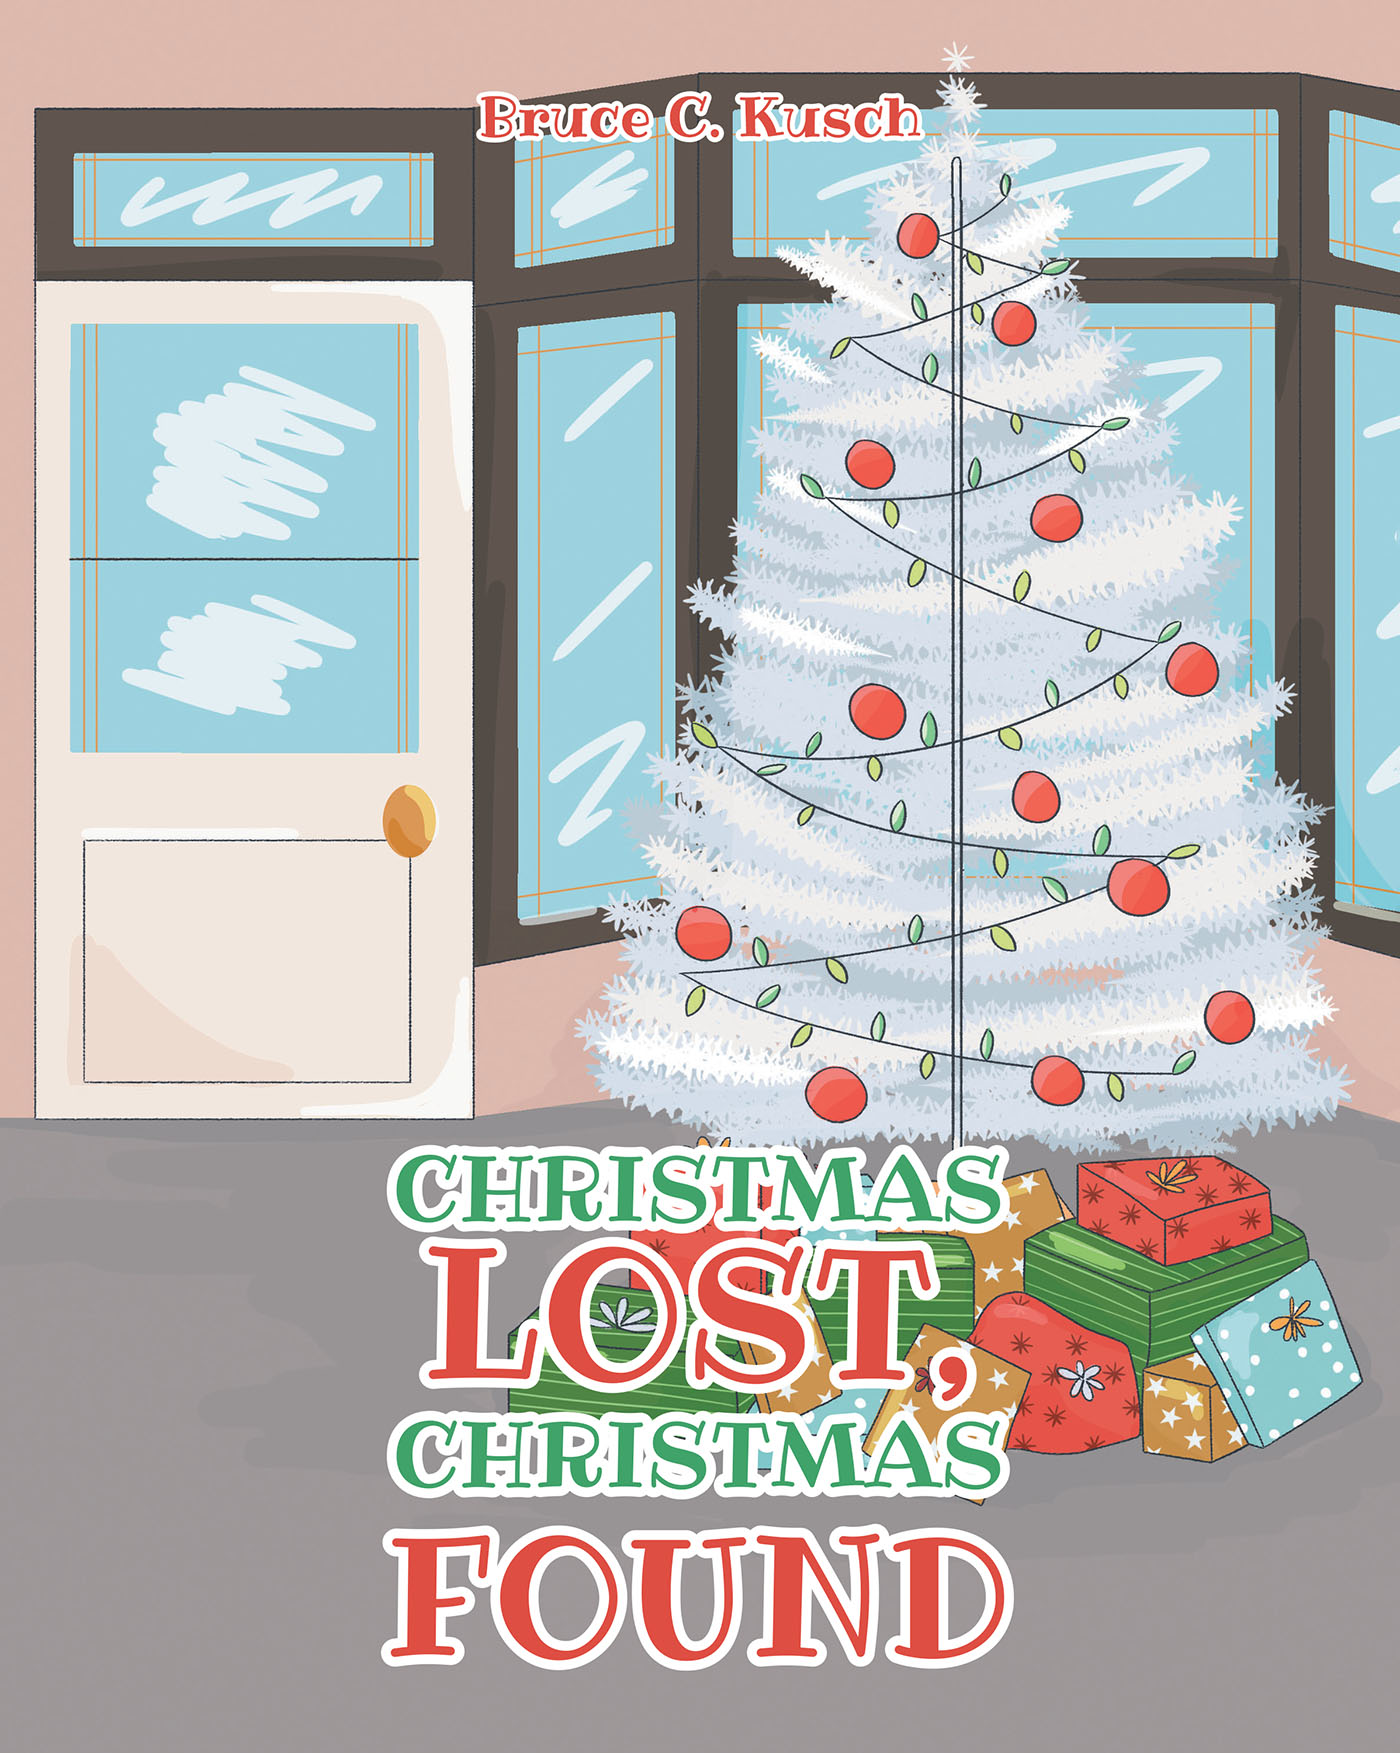 Author Bruce Kusch’s New Book, "Christmas Lost, Christmas Found," is the Incredible True Story of One Family Whose Entire Christmas Was Stolen